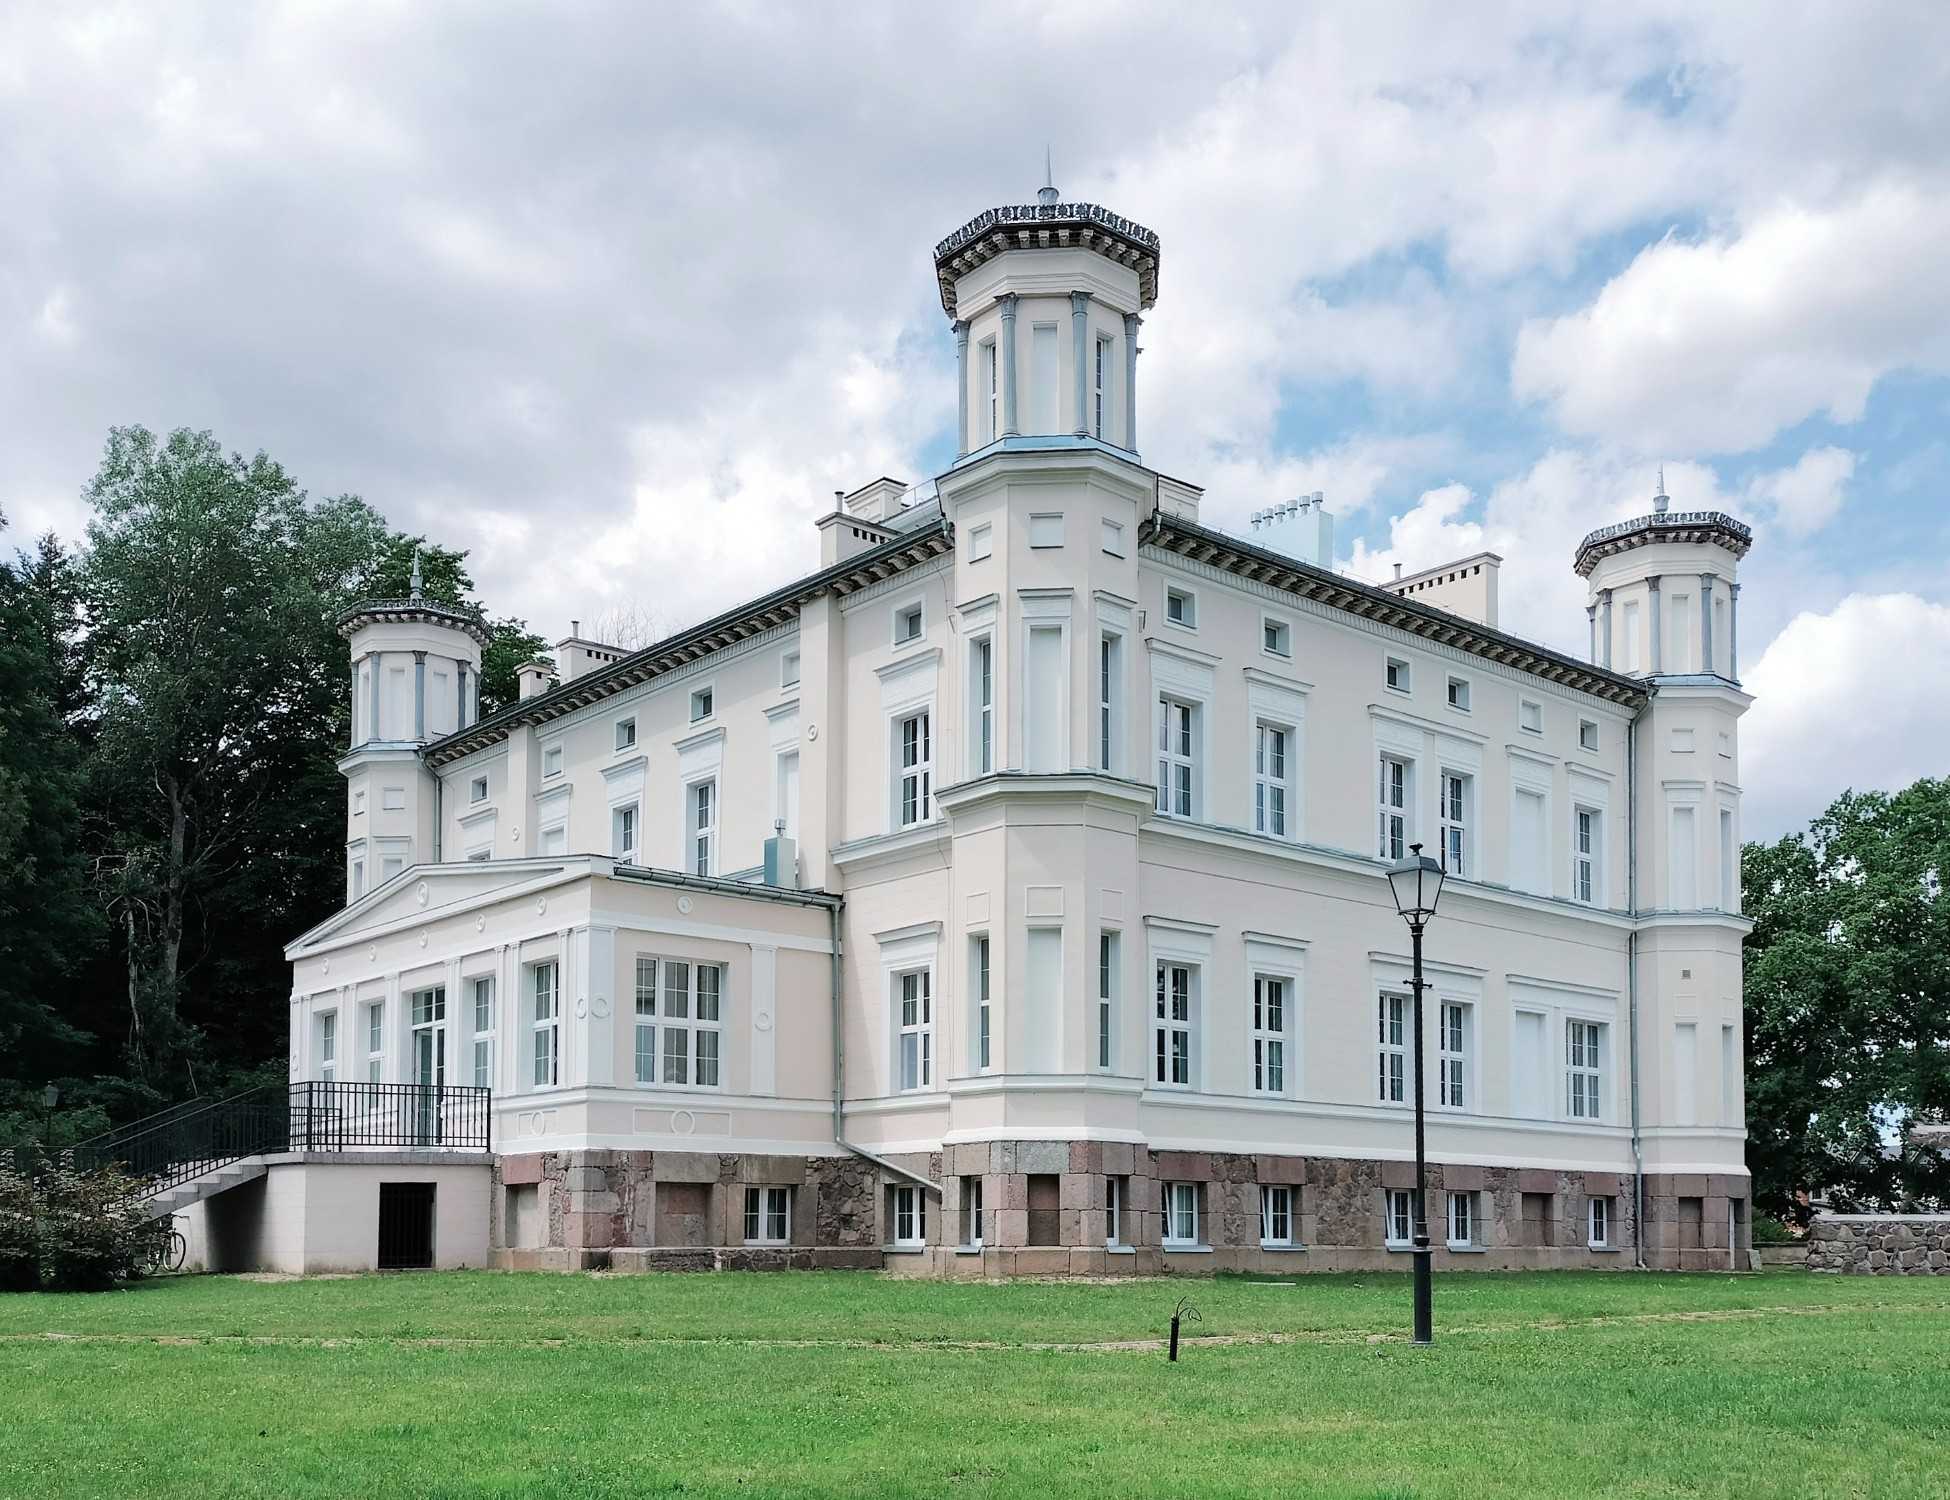 West Pomerania: Living in a palace near the Baltic Sea